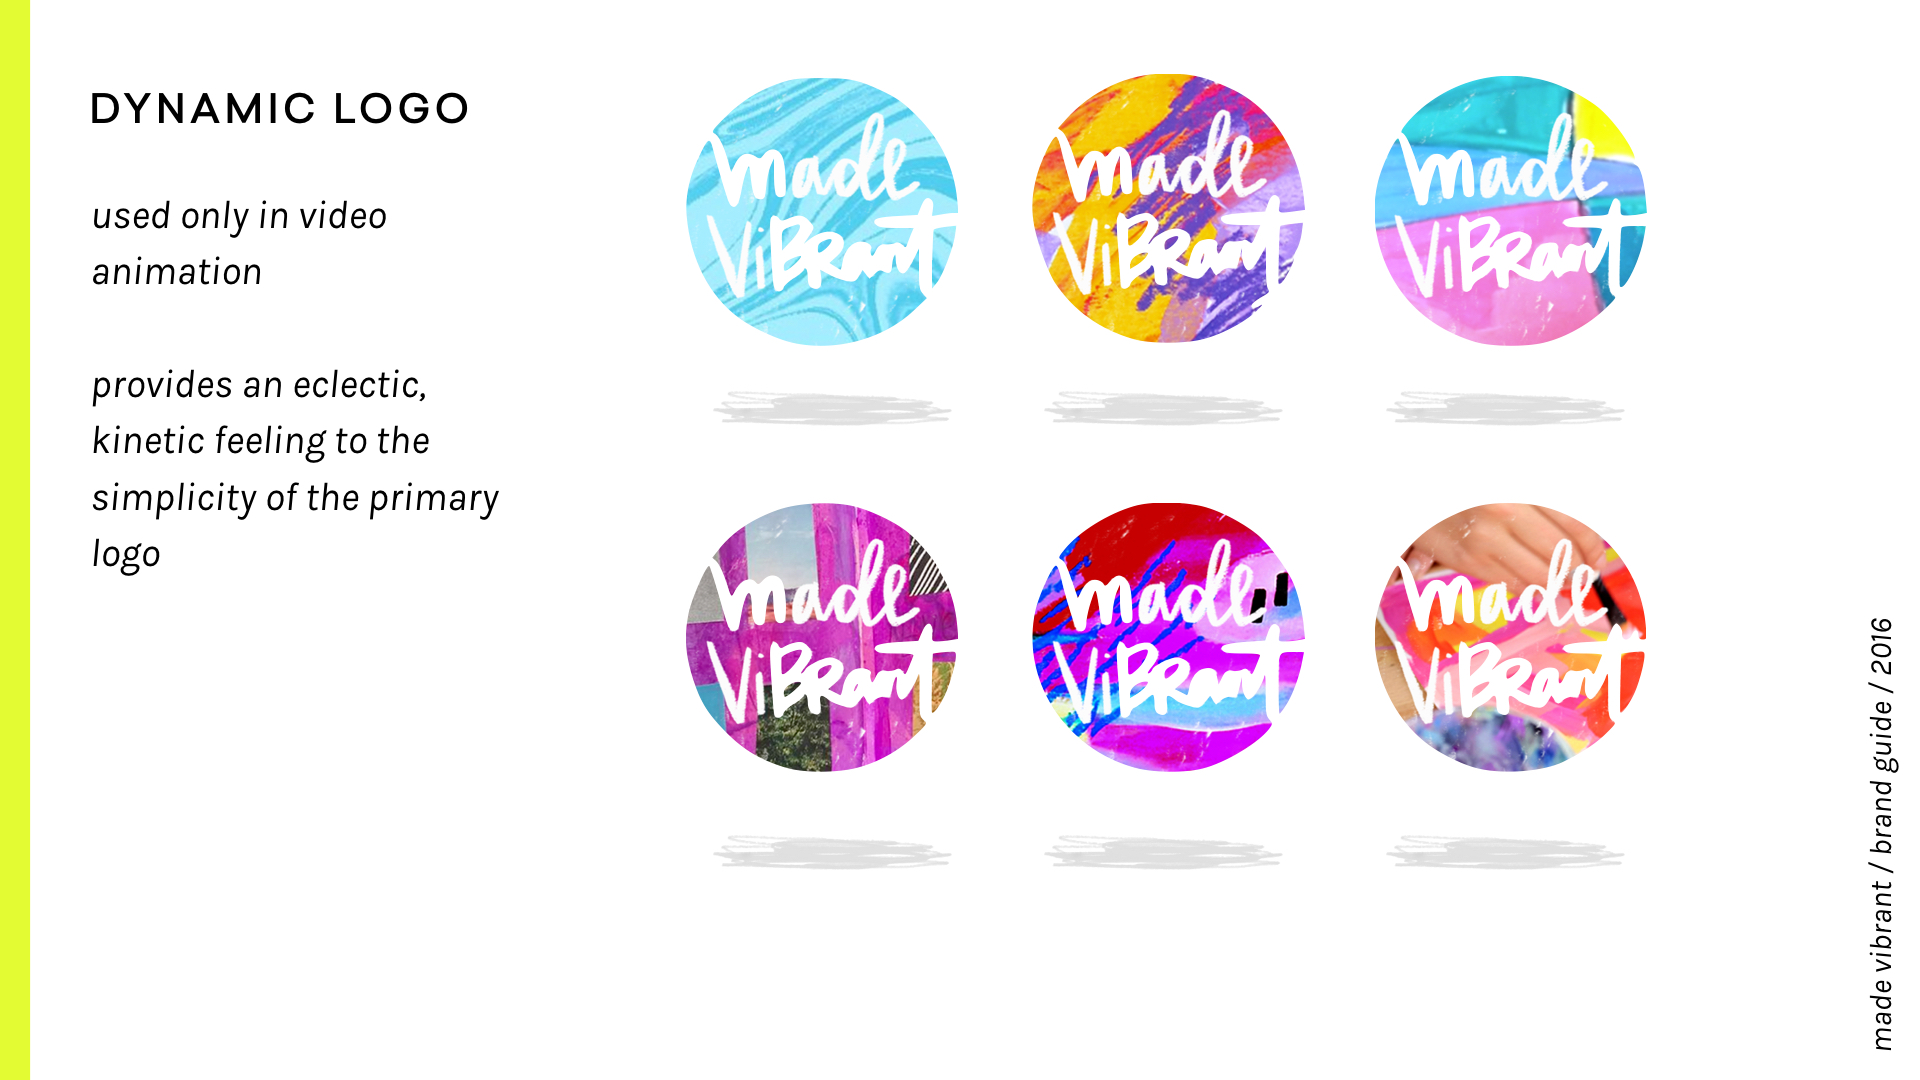 Made Vibrant 3.0 Brand Guidelines / vibrant, approachable, and creative branding / dynamic logo